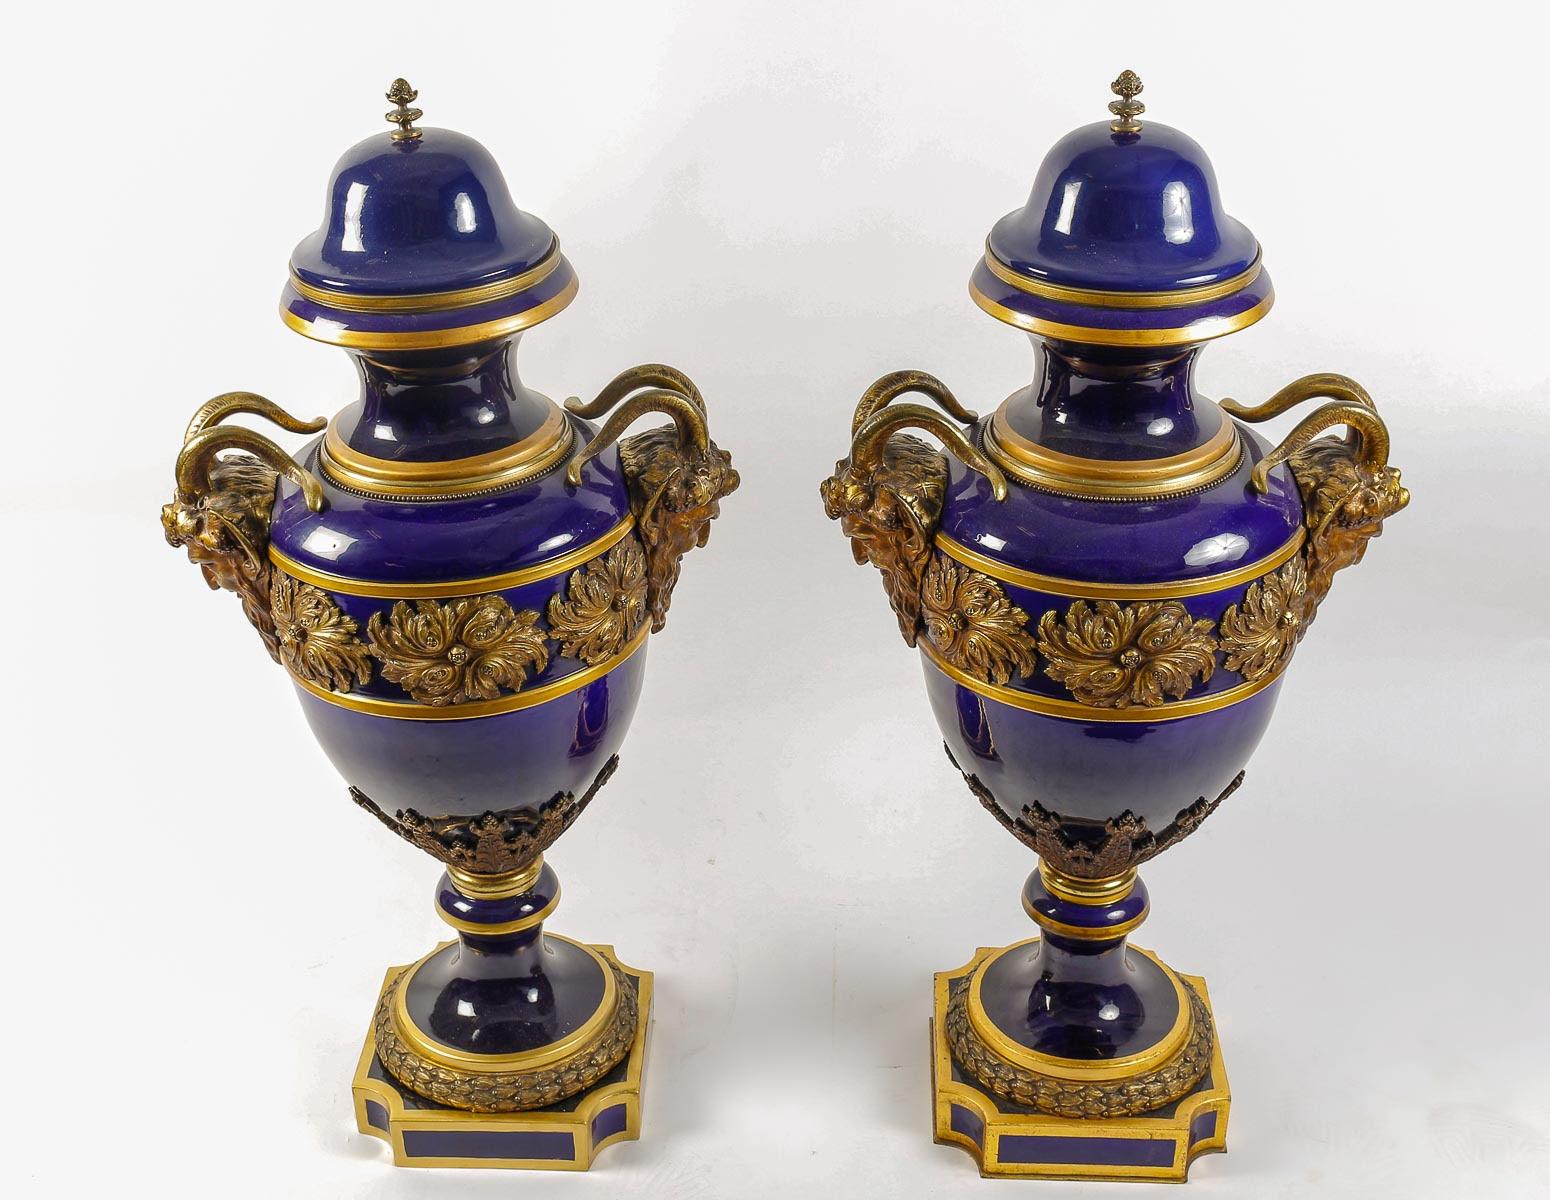 Large Pair of Sèvres Porcelain Covered Vases.

Large pair of covered vases in Sèvres porcelain, cobalt blue with gold highlights and patinated gilt bronze, 19th century, Napoleon III period.    

h: 104cm , w: 53cm, d: 34cm